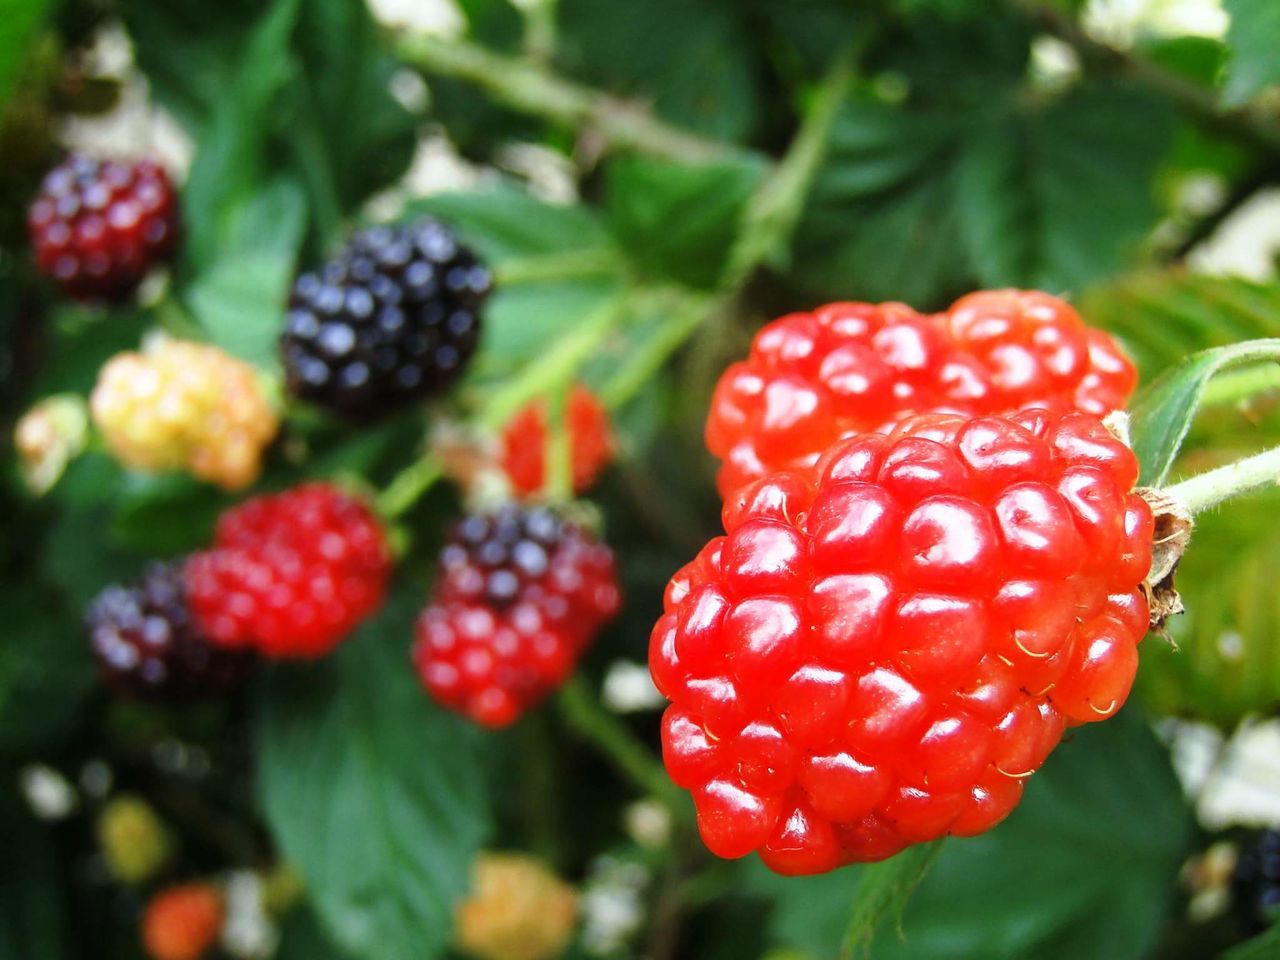 CLOSE-UP OF STRAWBERRIES GROWING ON TREE